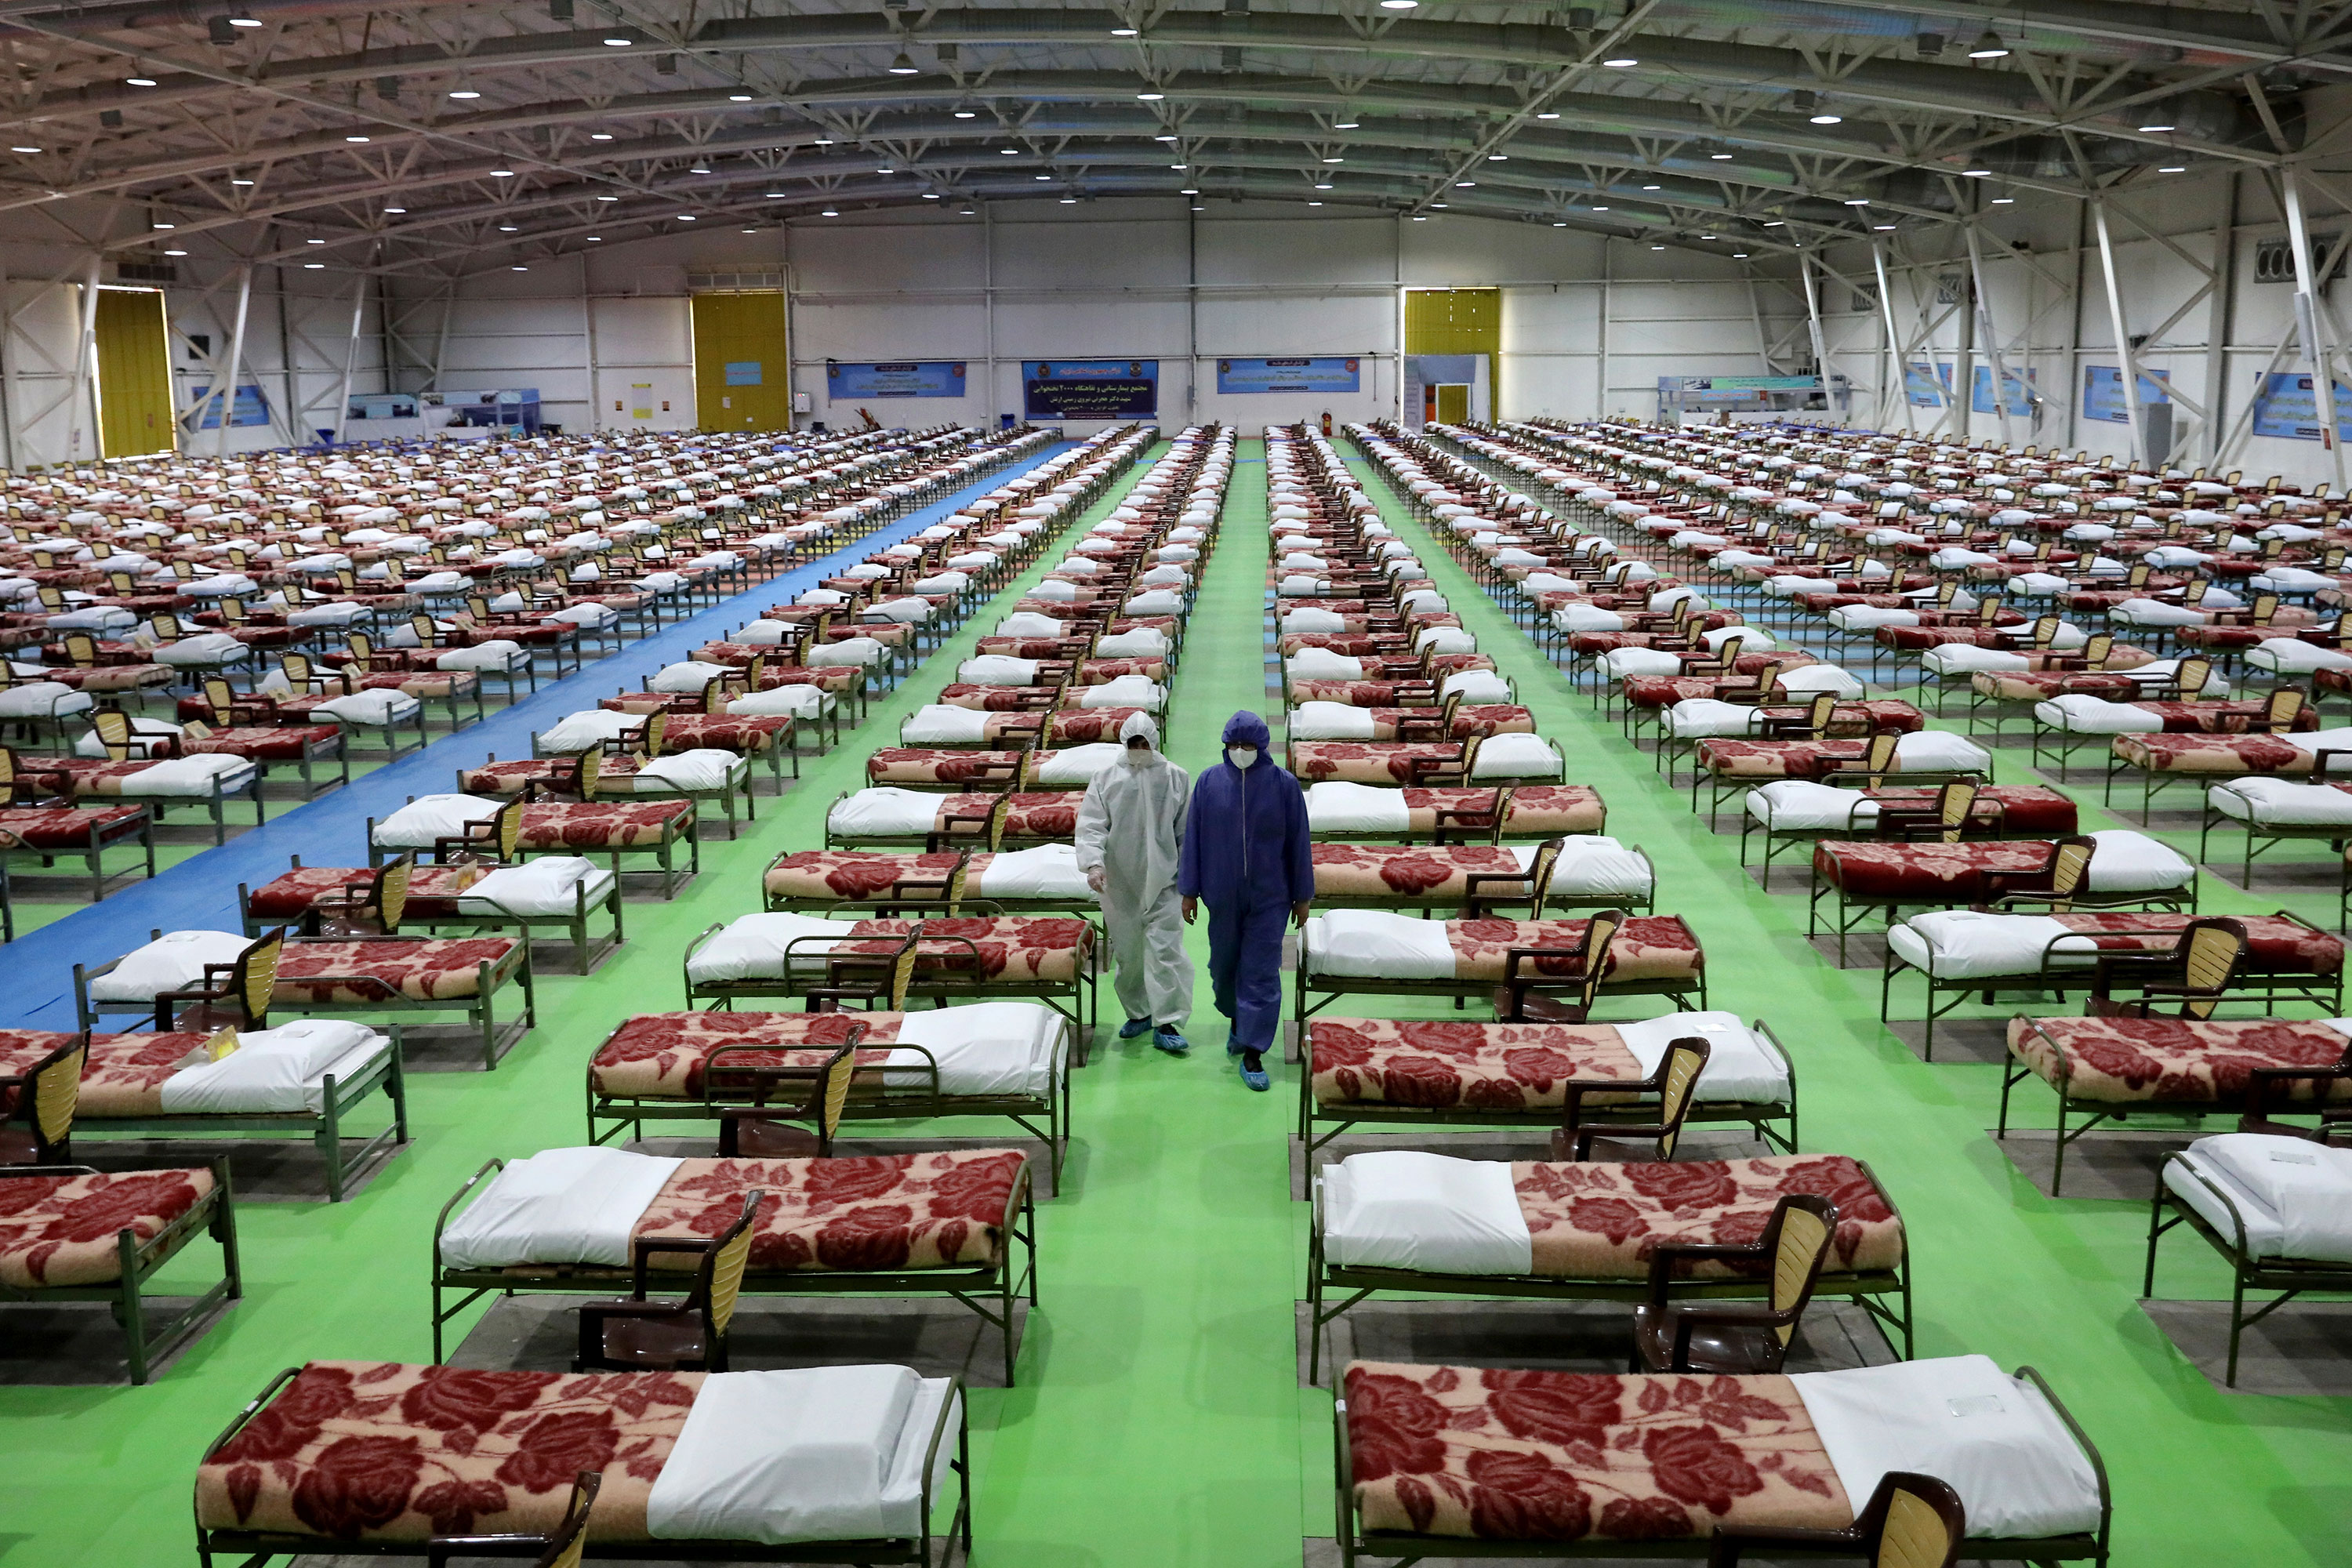 People in protective clothing walk past rows of beds at a temporary 2,000-bed hospital set up by the Iranian army at an international exhibition center in Tehran, Iran, on March 26.